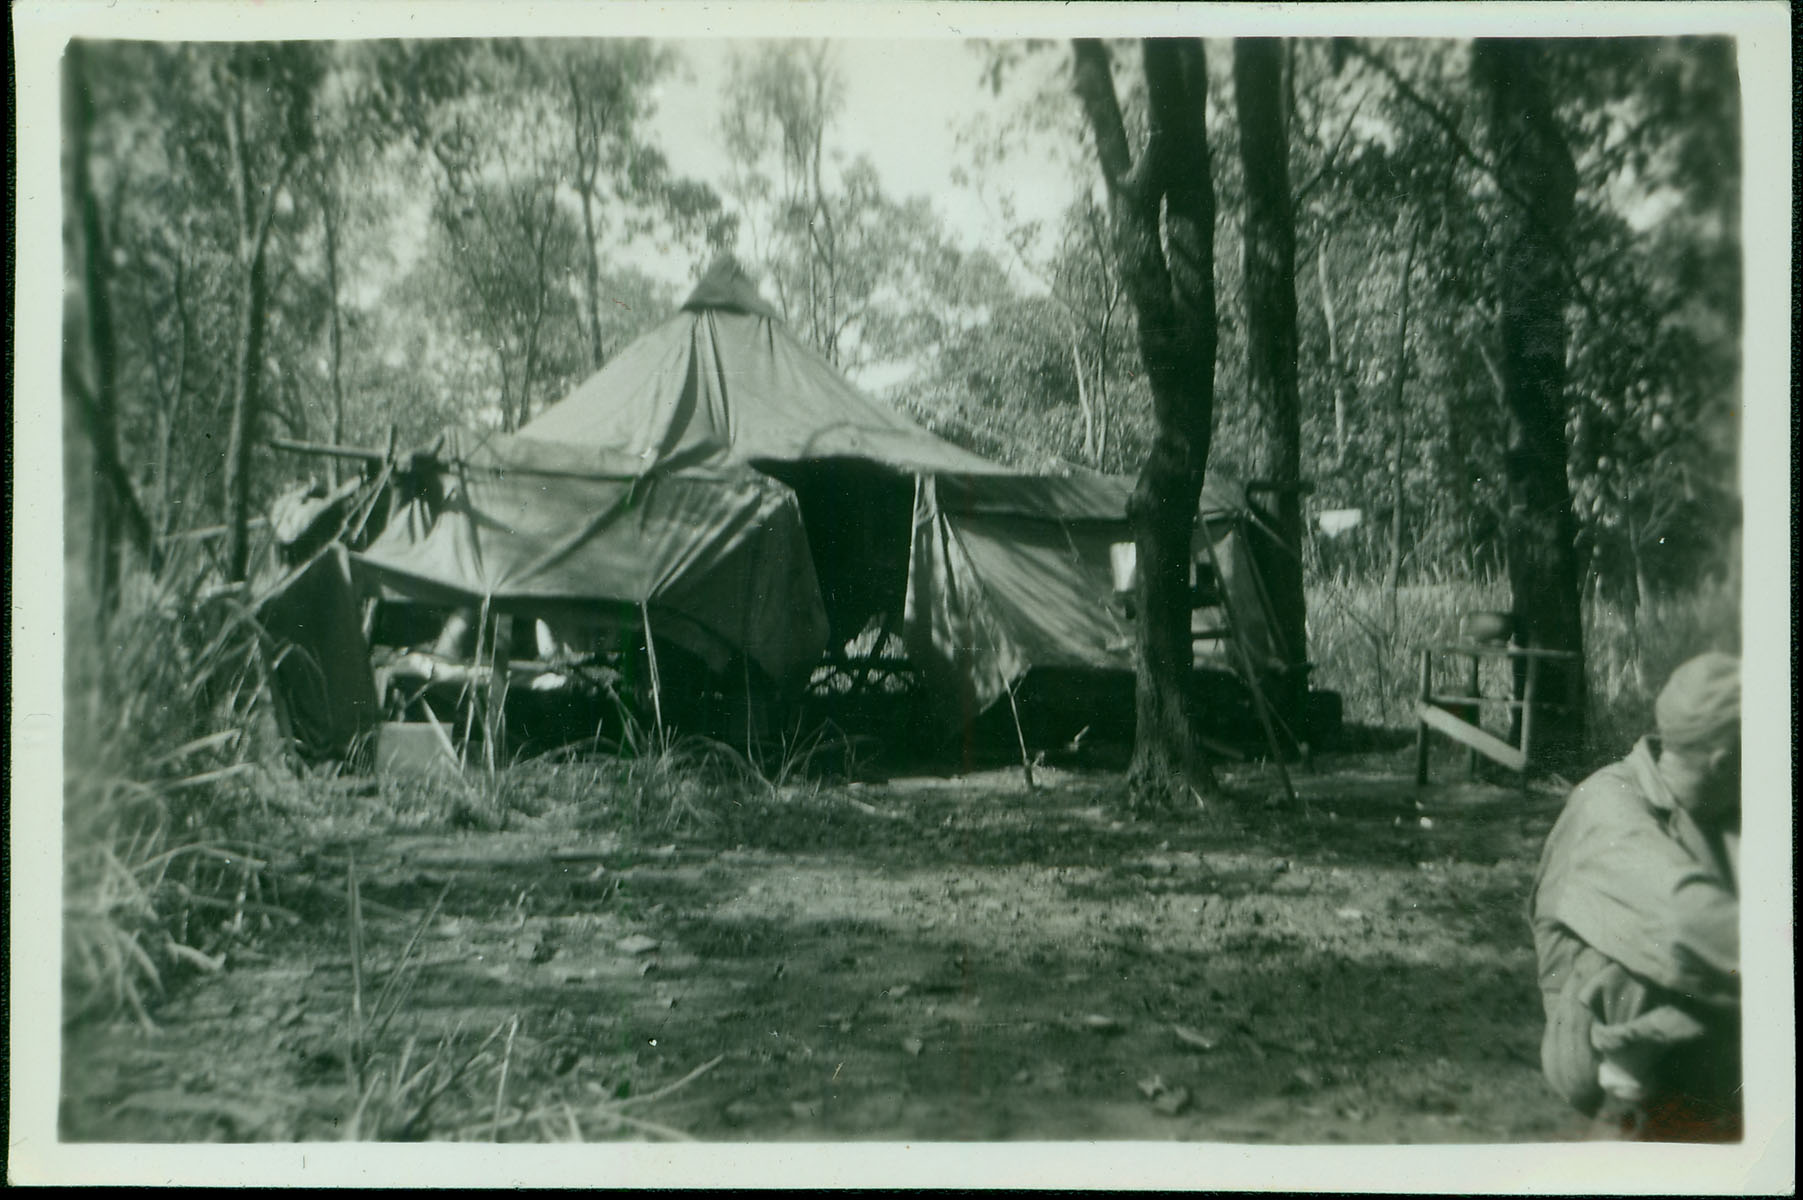 While stationed in Australia, this tent served as home for Merchant and the fellow members of his unit.